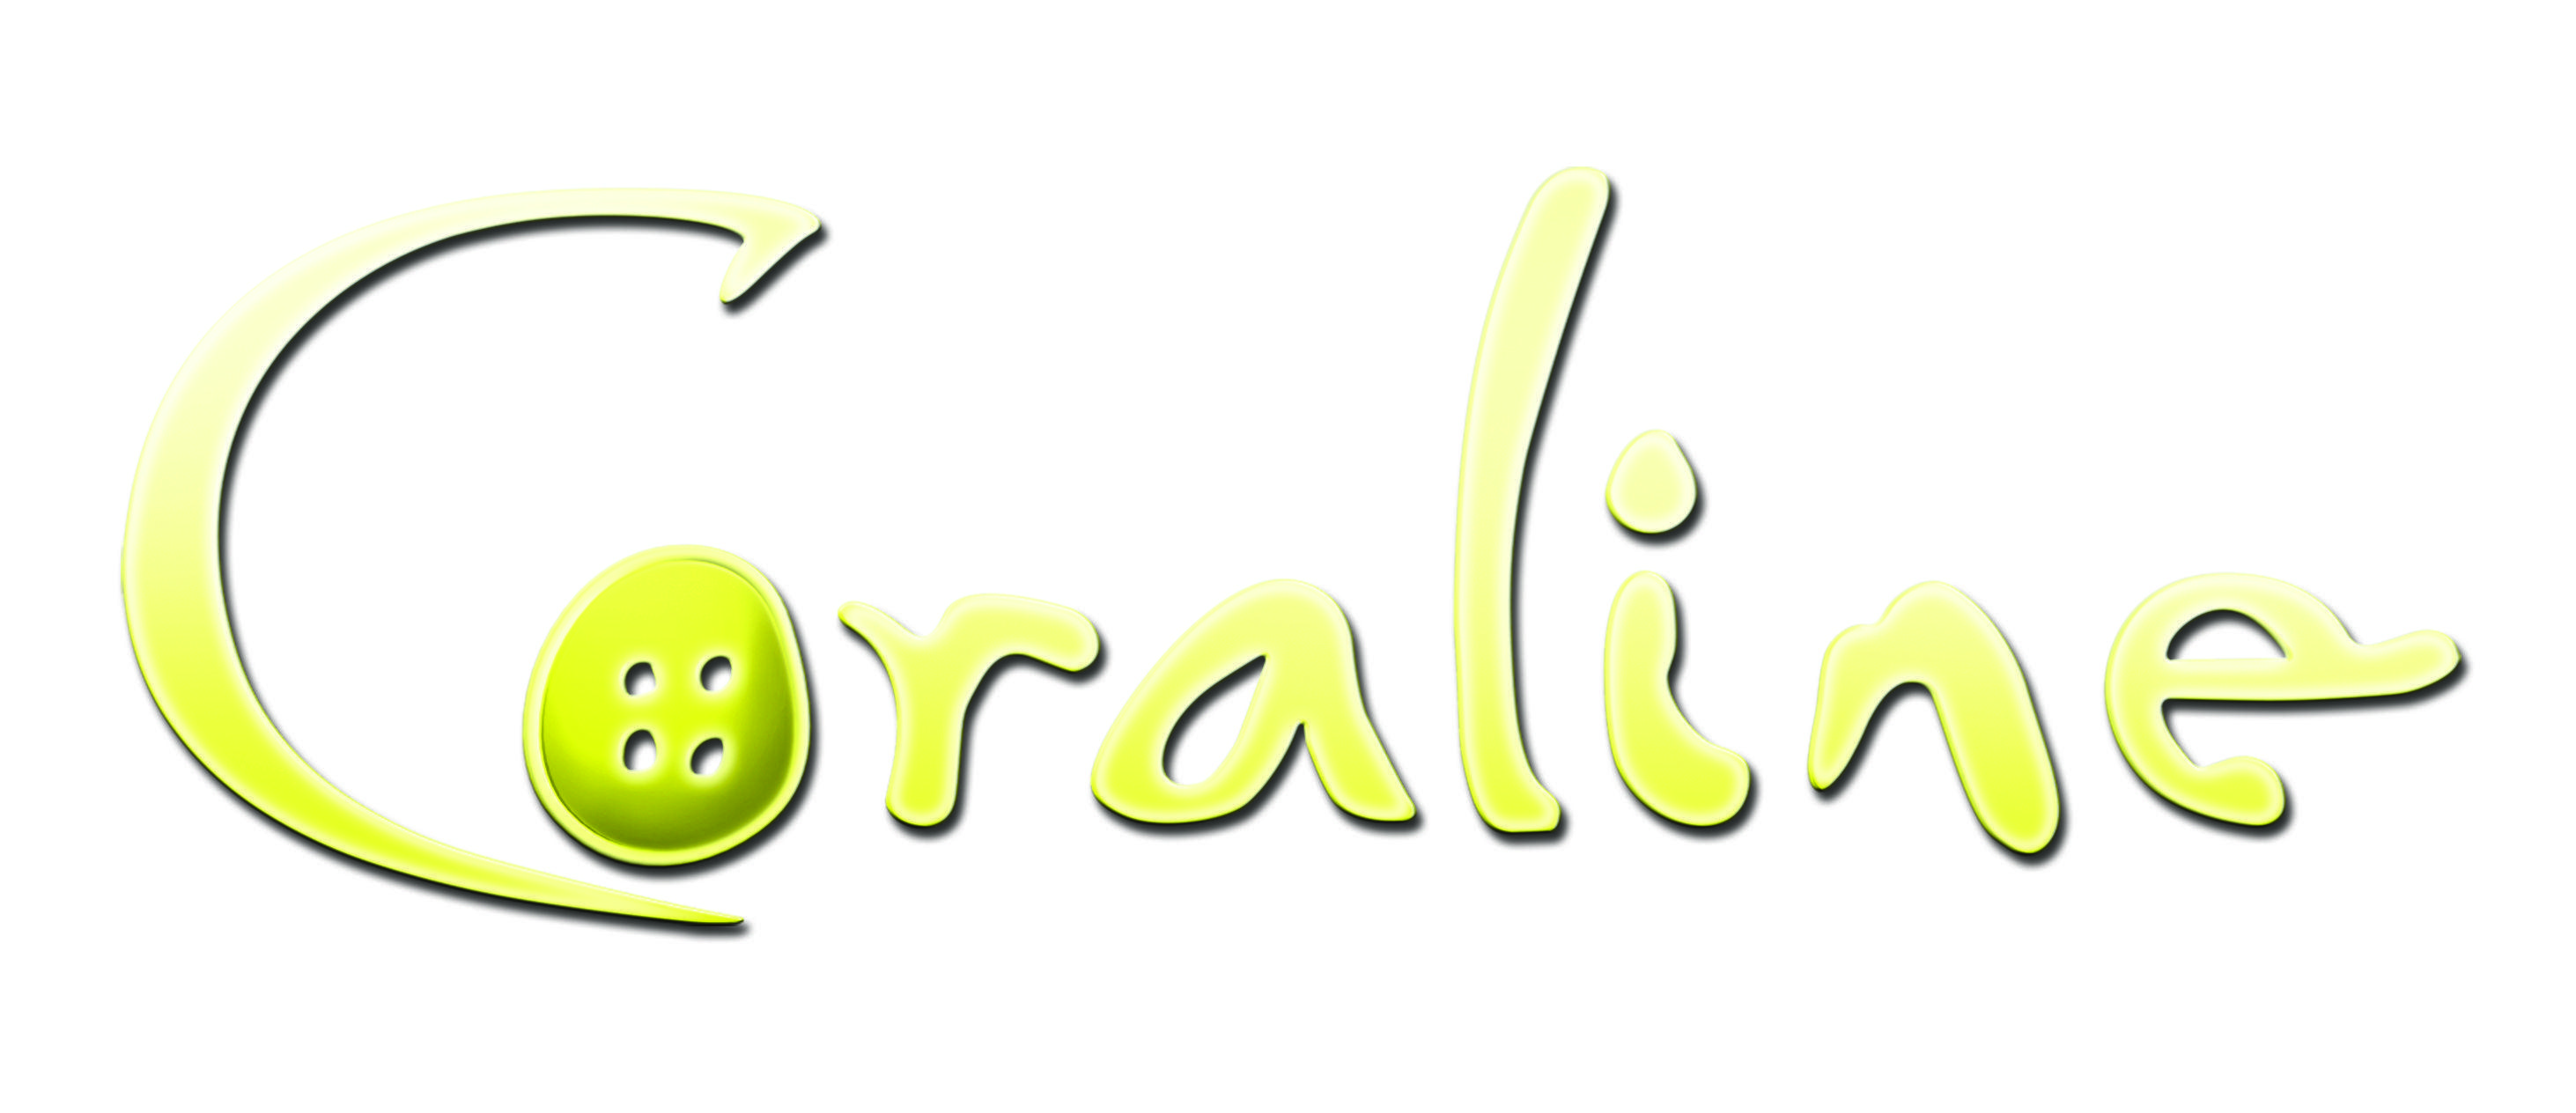 Coraline Logo - Coraline - The other stuff - Official CollecToons Forums